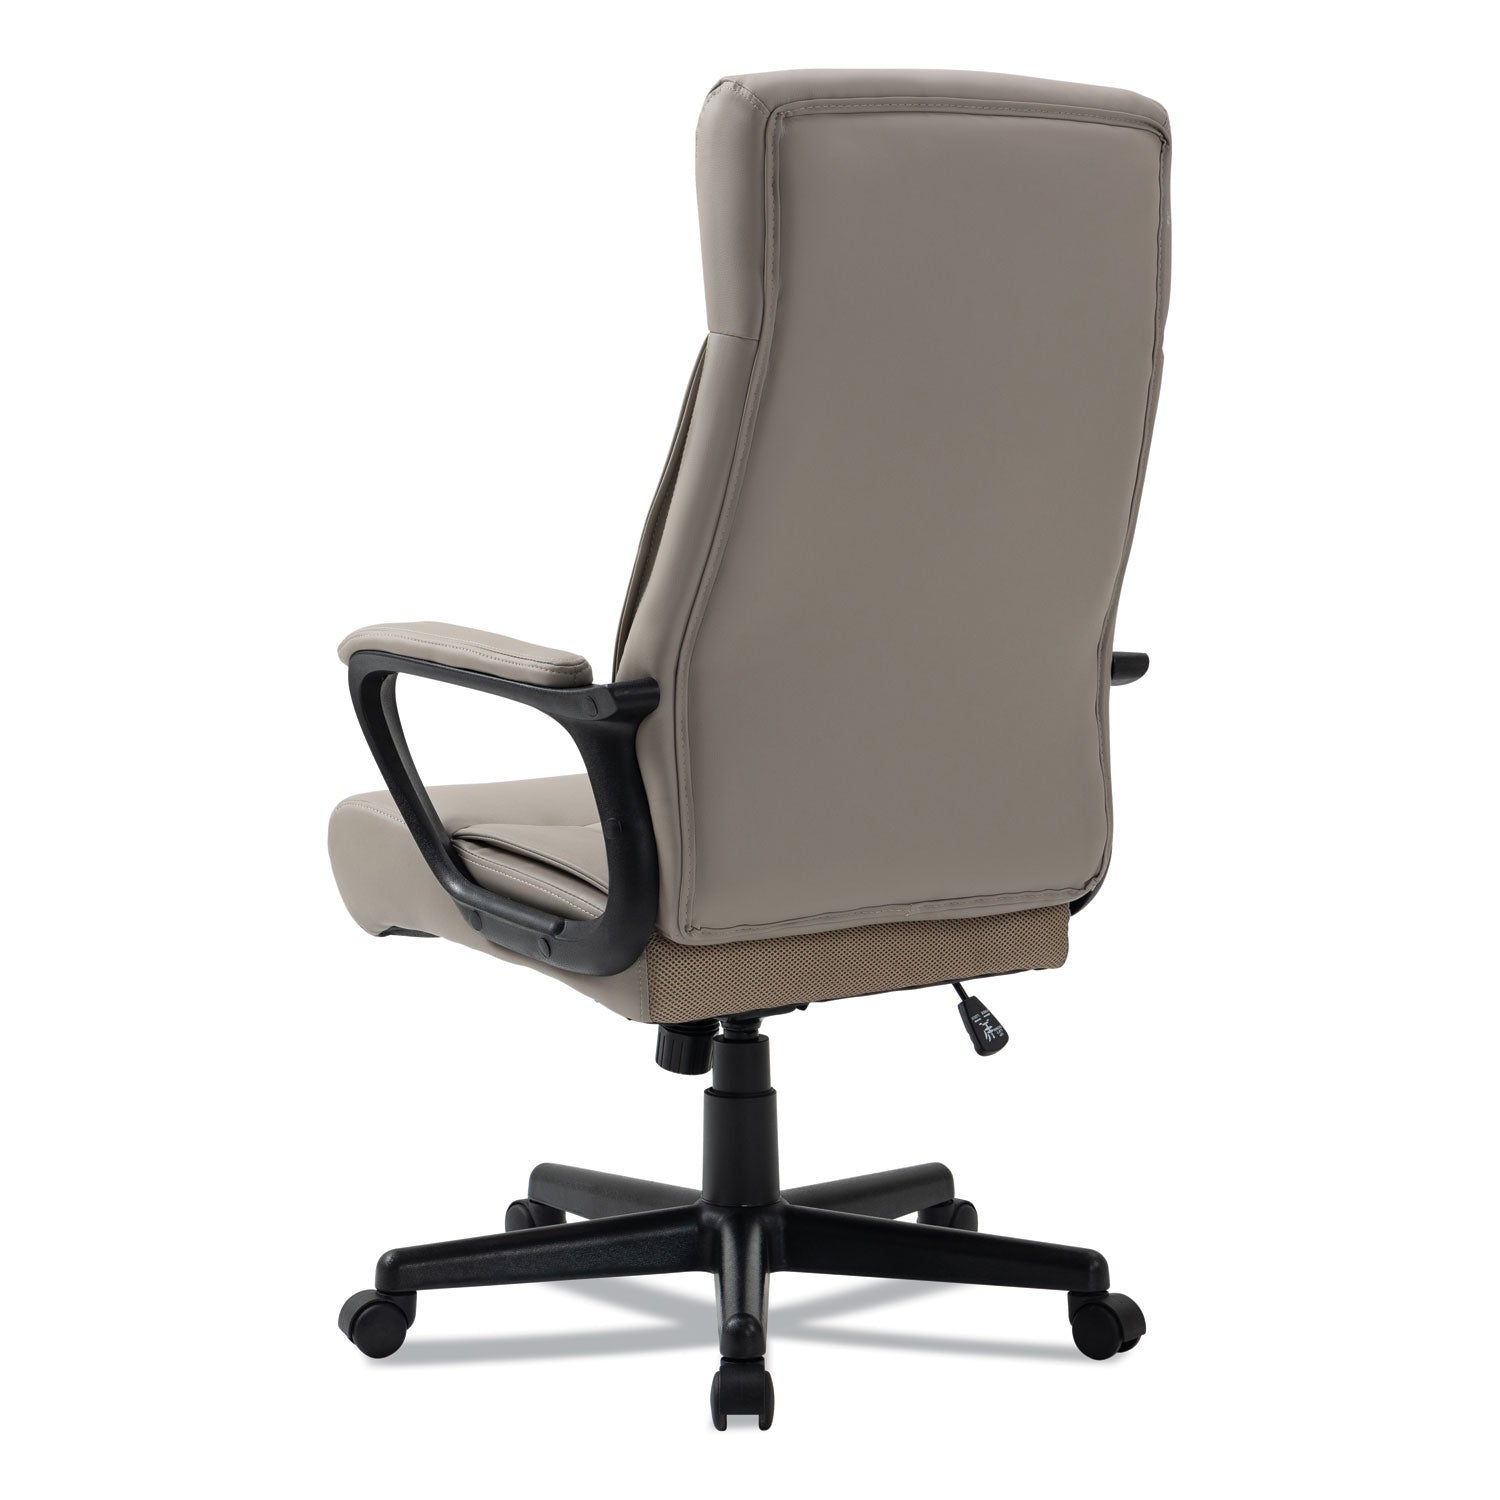 alera-oxnam-series-high-back-task-chair-supports-up-to-275-lbs-1756-to-2138-seat-height-tan-seat-back-black-base_aleon41b59 - 8